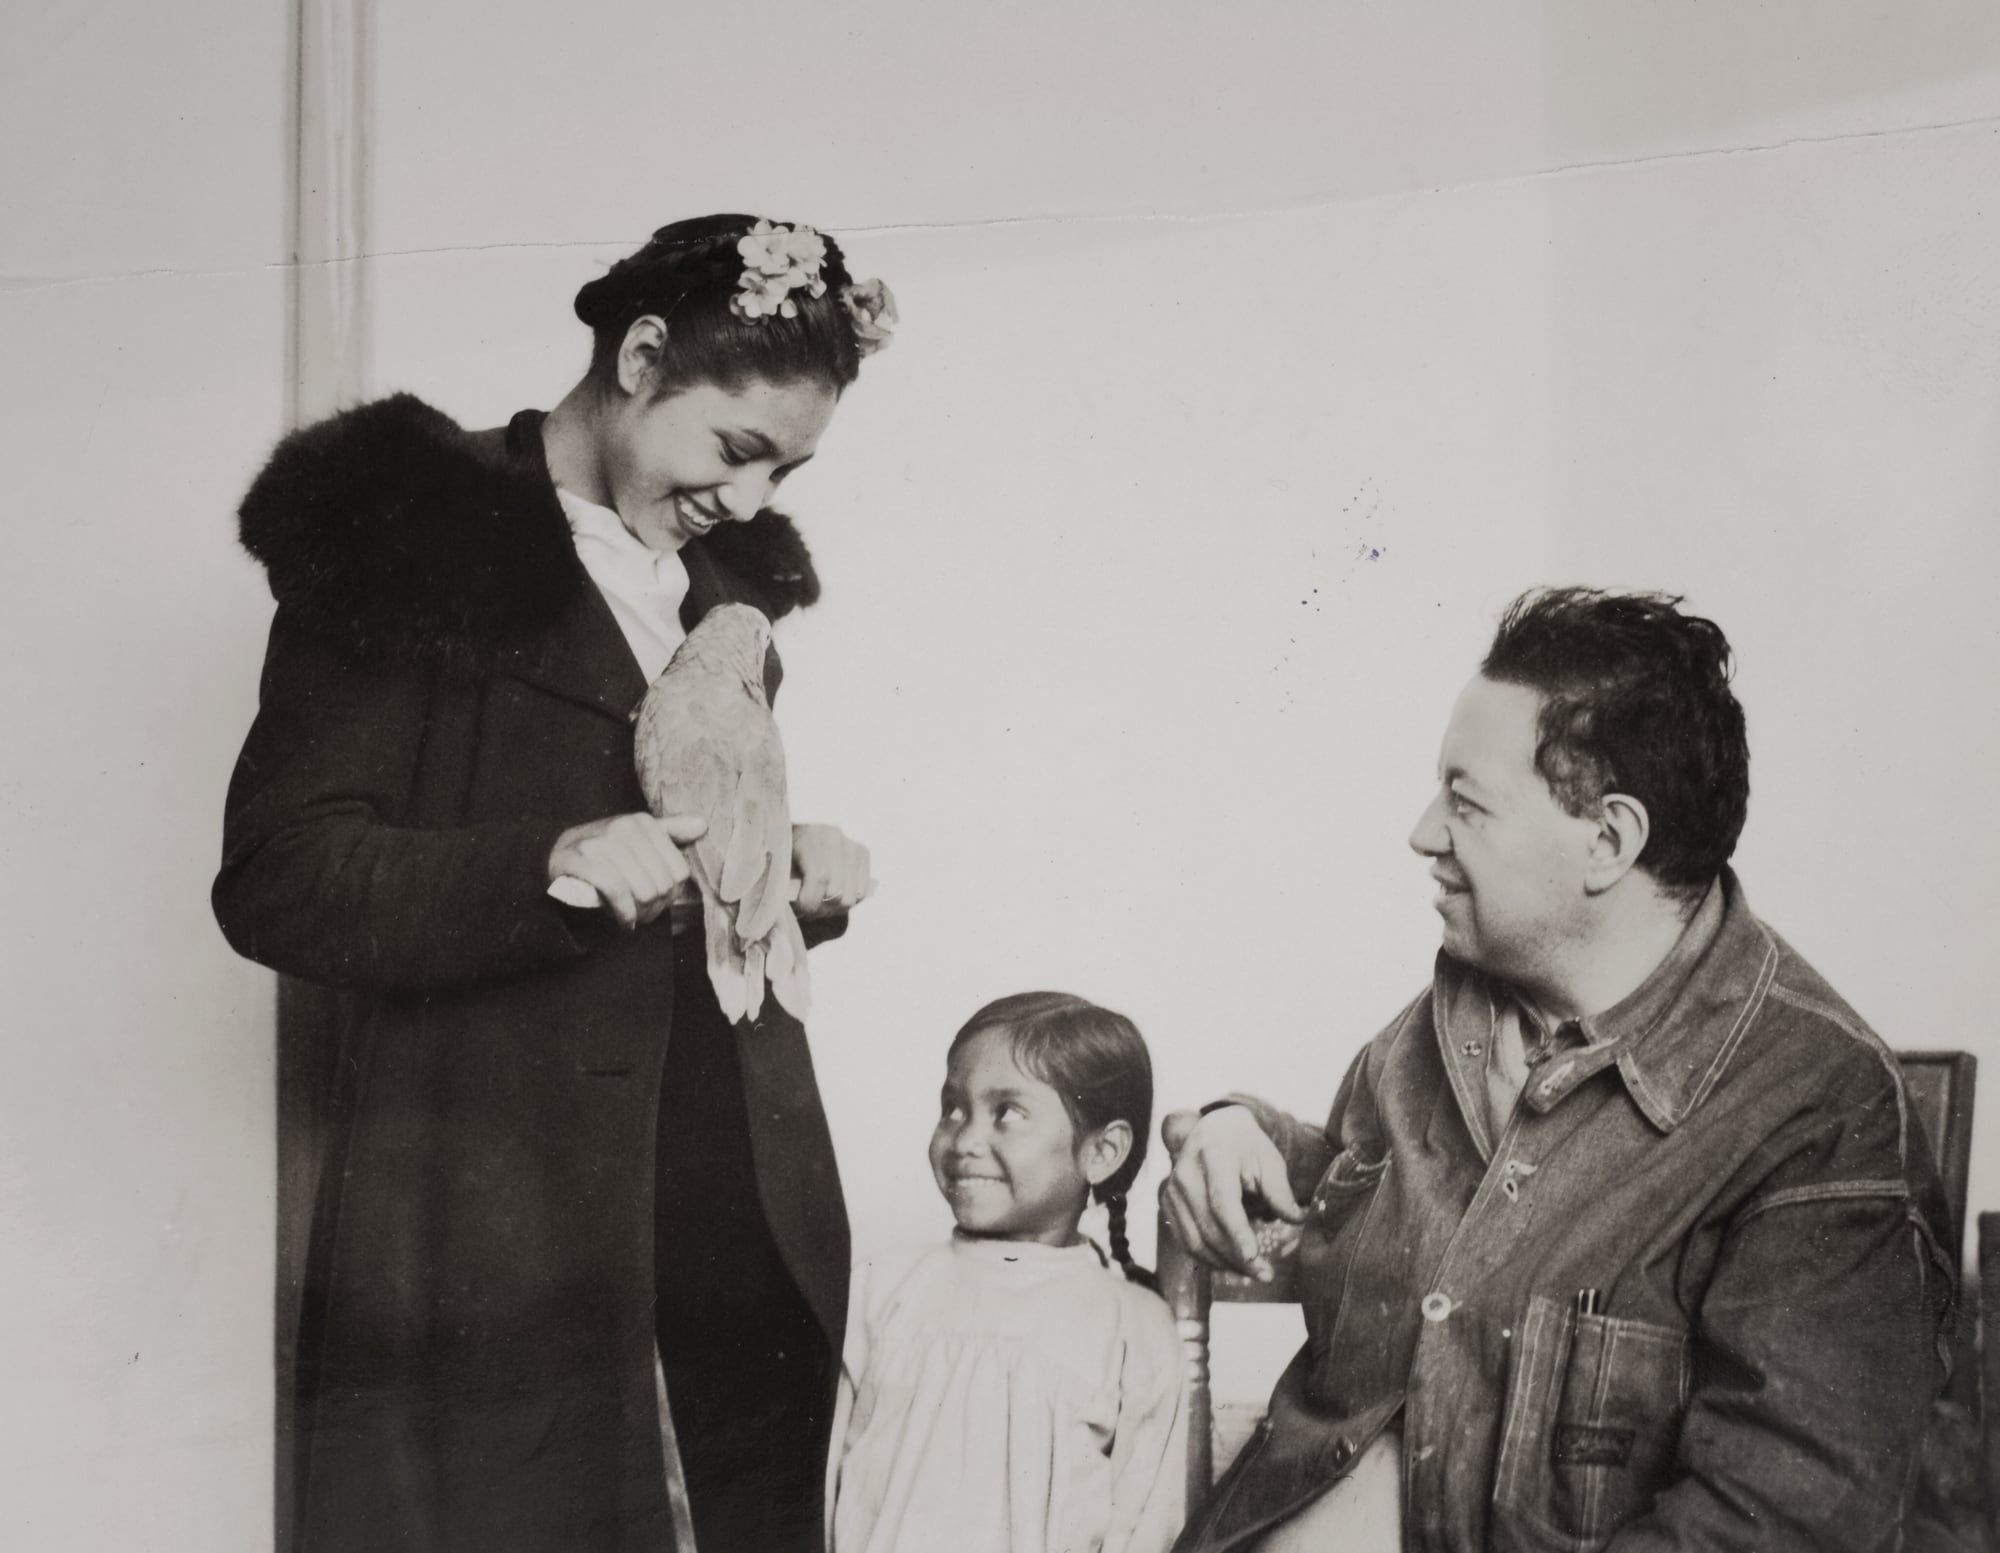 a woman wearing a fur-collared coat holds a bird while a young girl looks up at it with a smile. a man with short hair sits in a chair nearby